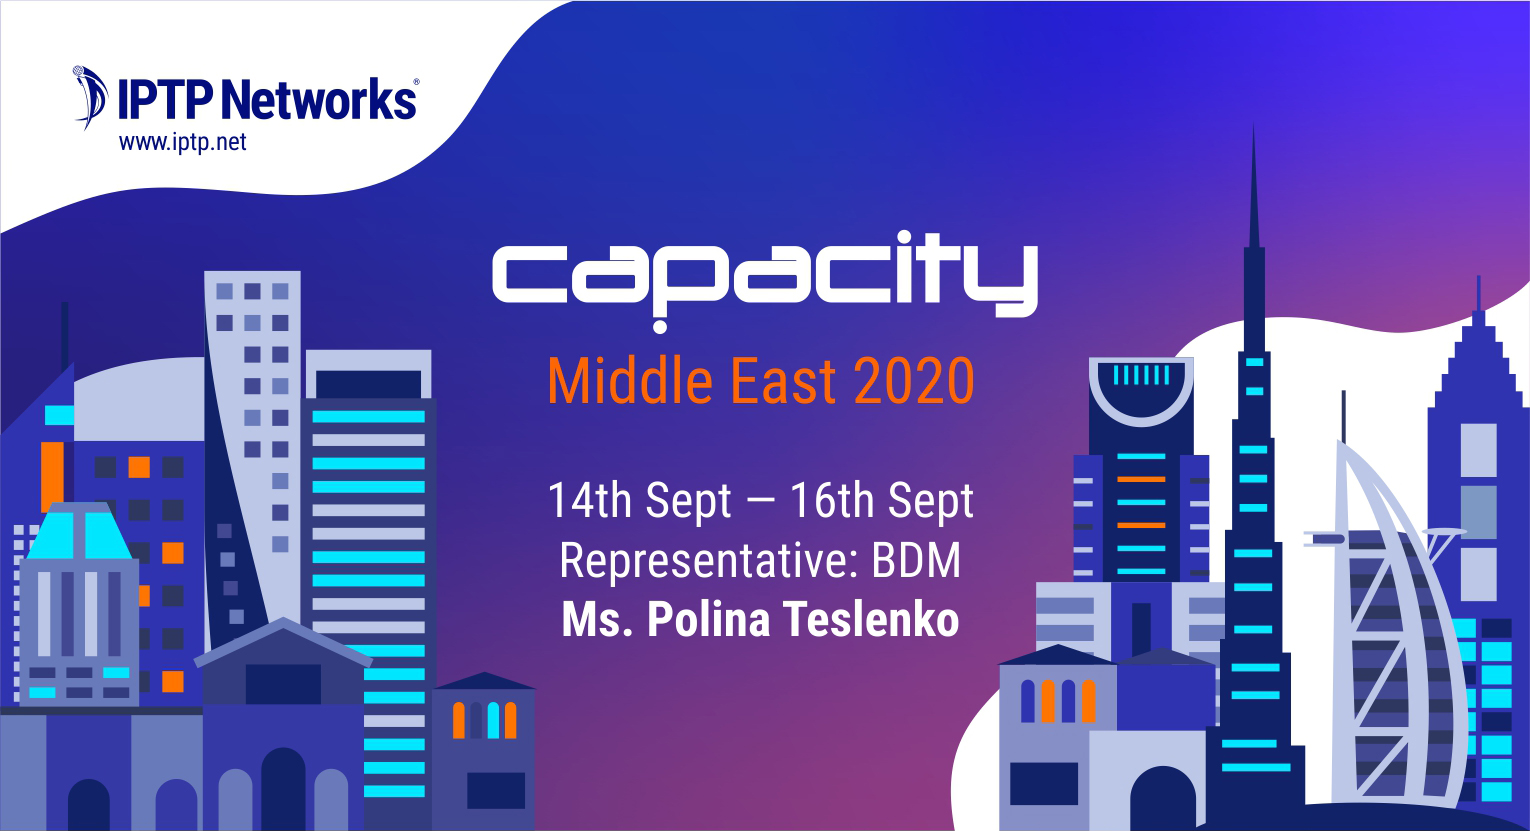 Capacity Middle East 2020